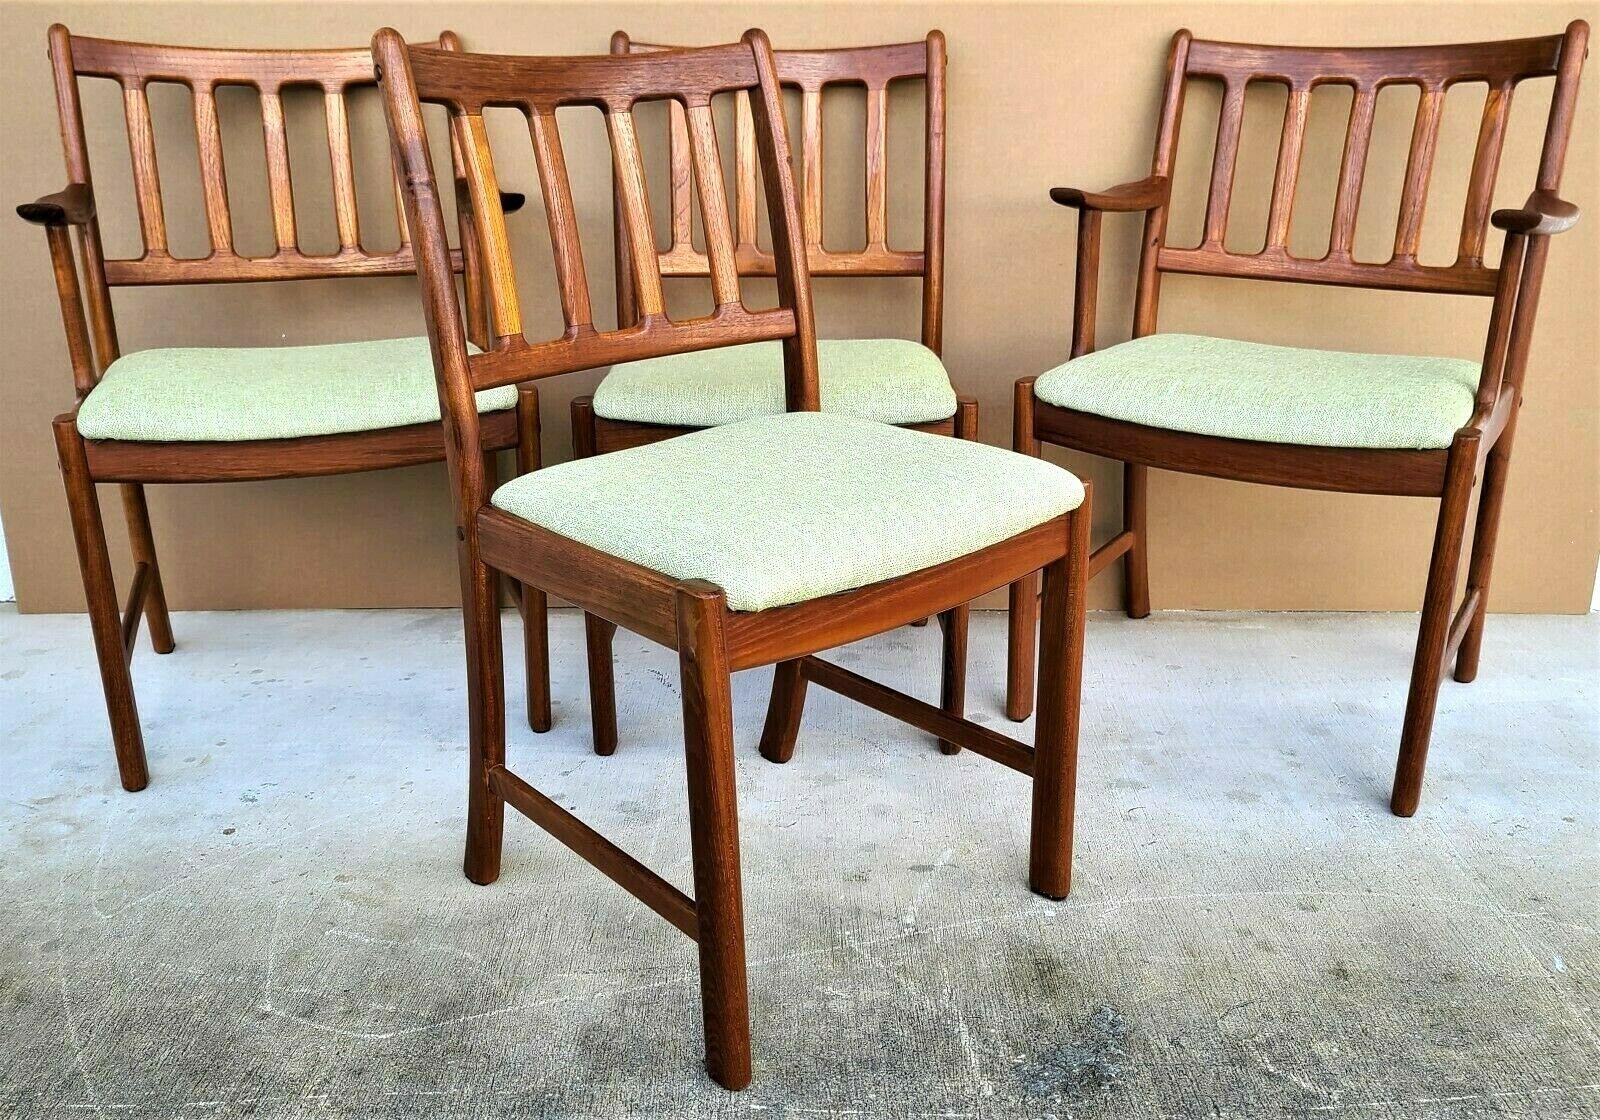 Offering One Of Our Recent Palm Beach Estate Fine Furniture Acquisitions Of A
Set of 4 Johannes Andersen Teak Dining Chairs for Uldum Møbelfabrik 
Set includes 2 arm and 2 side chairs

Approximate Measurements in Inches
Armchairs:
34